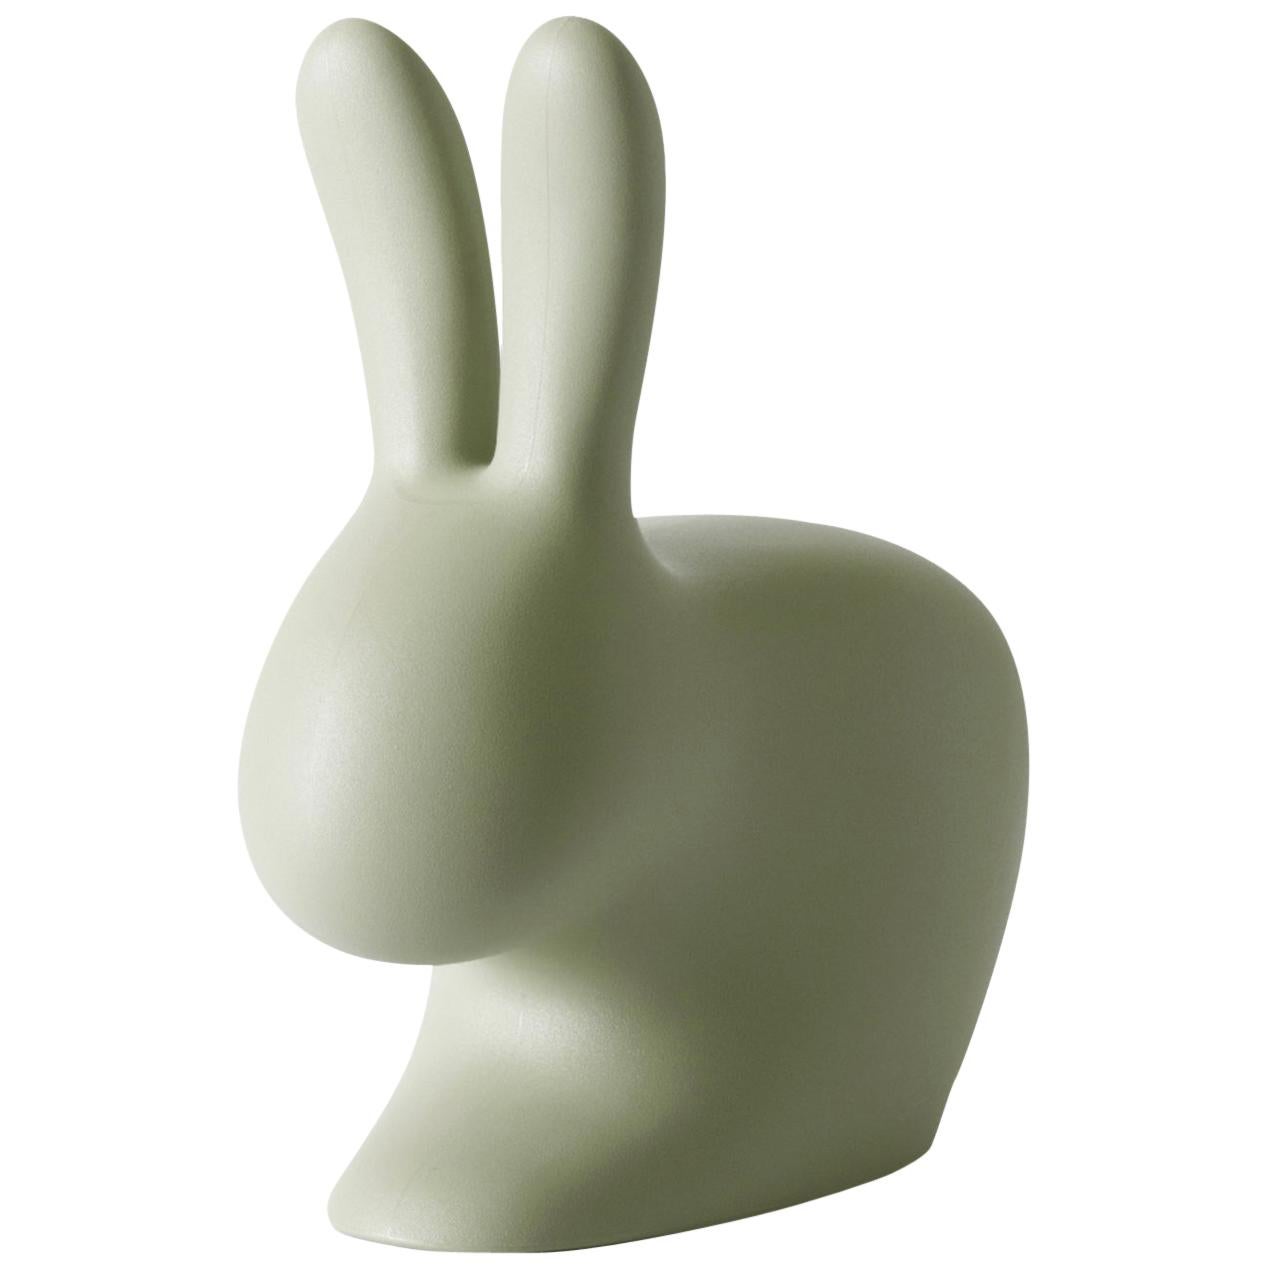 In Stock in Los Angeles, Balsam Green Baby Rabbit Chair by Stefano Giovannoni